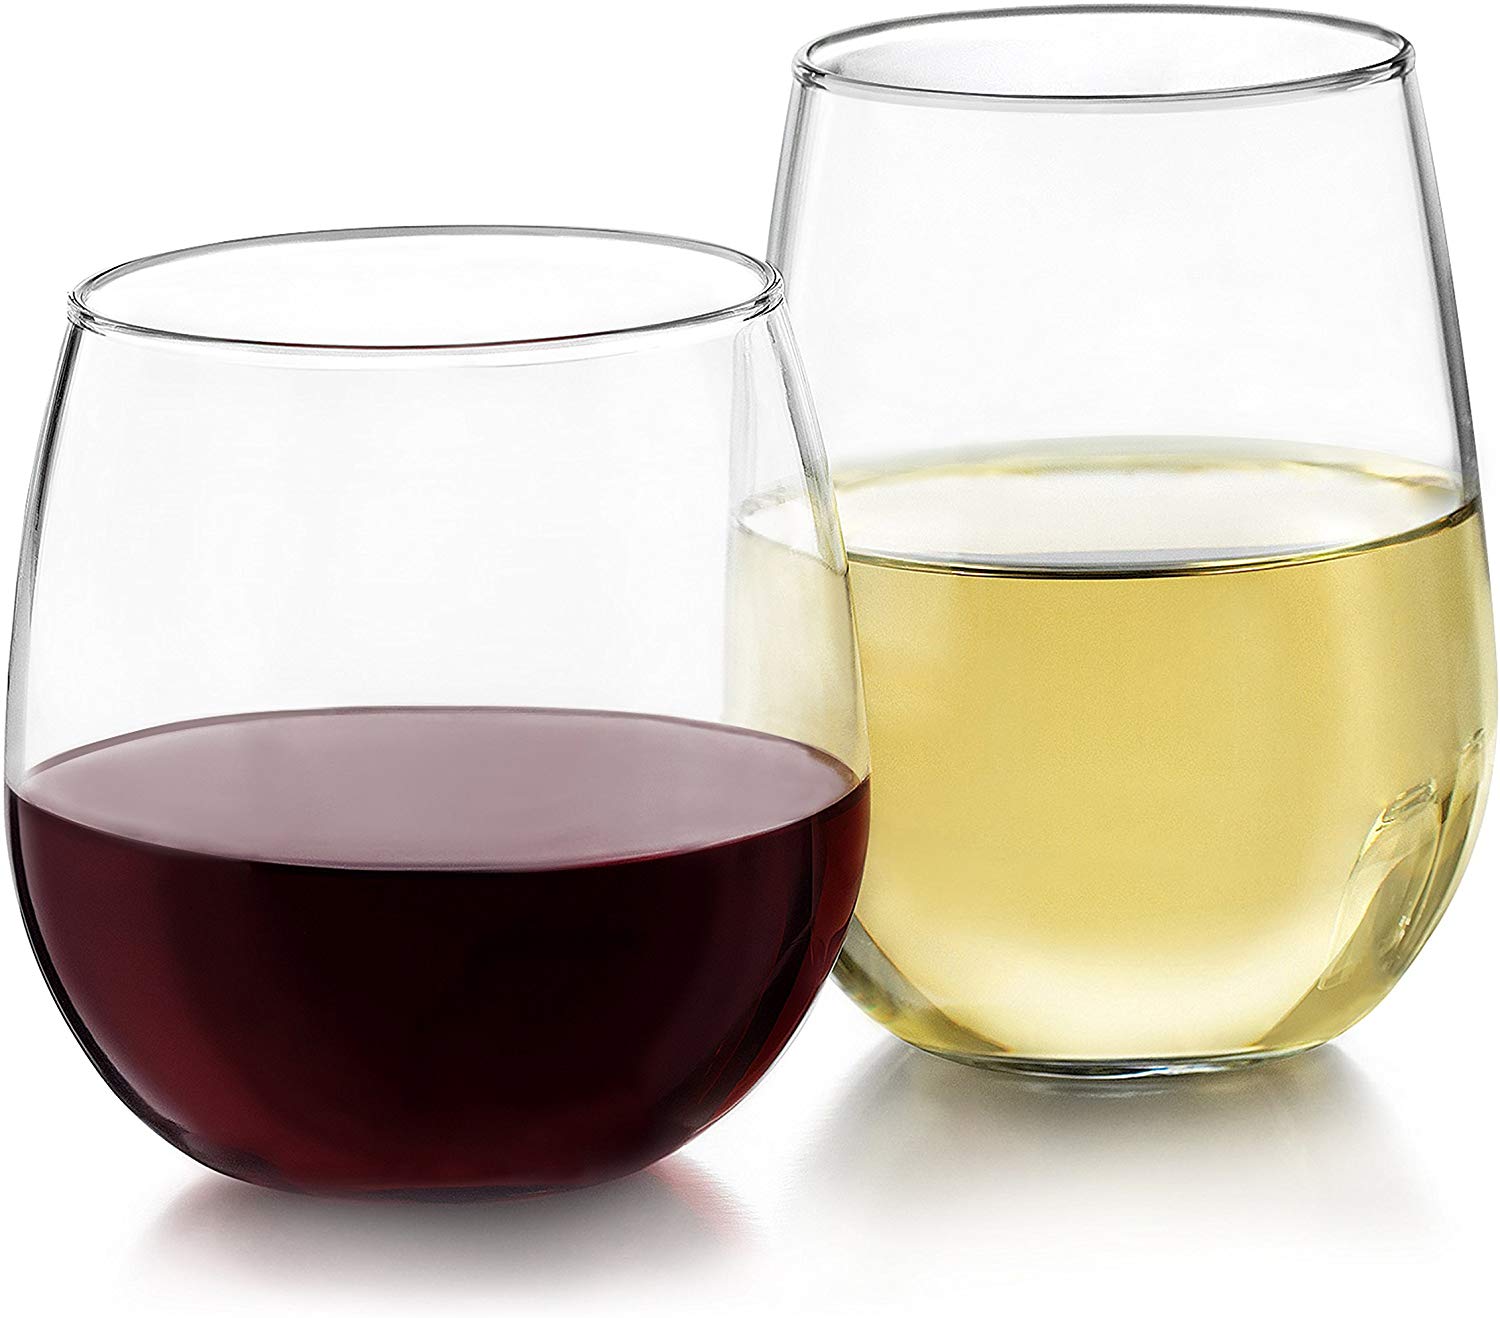 Libbey stemless wine glasses